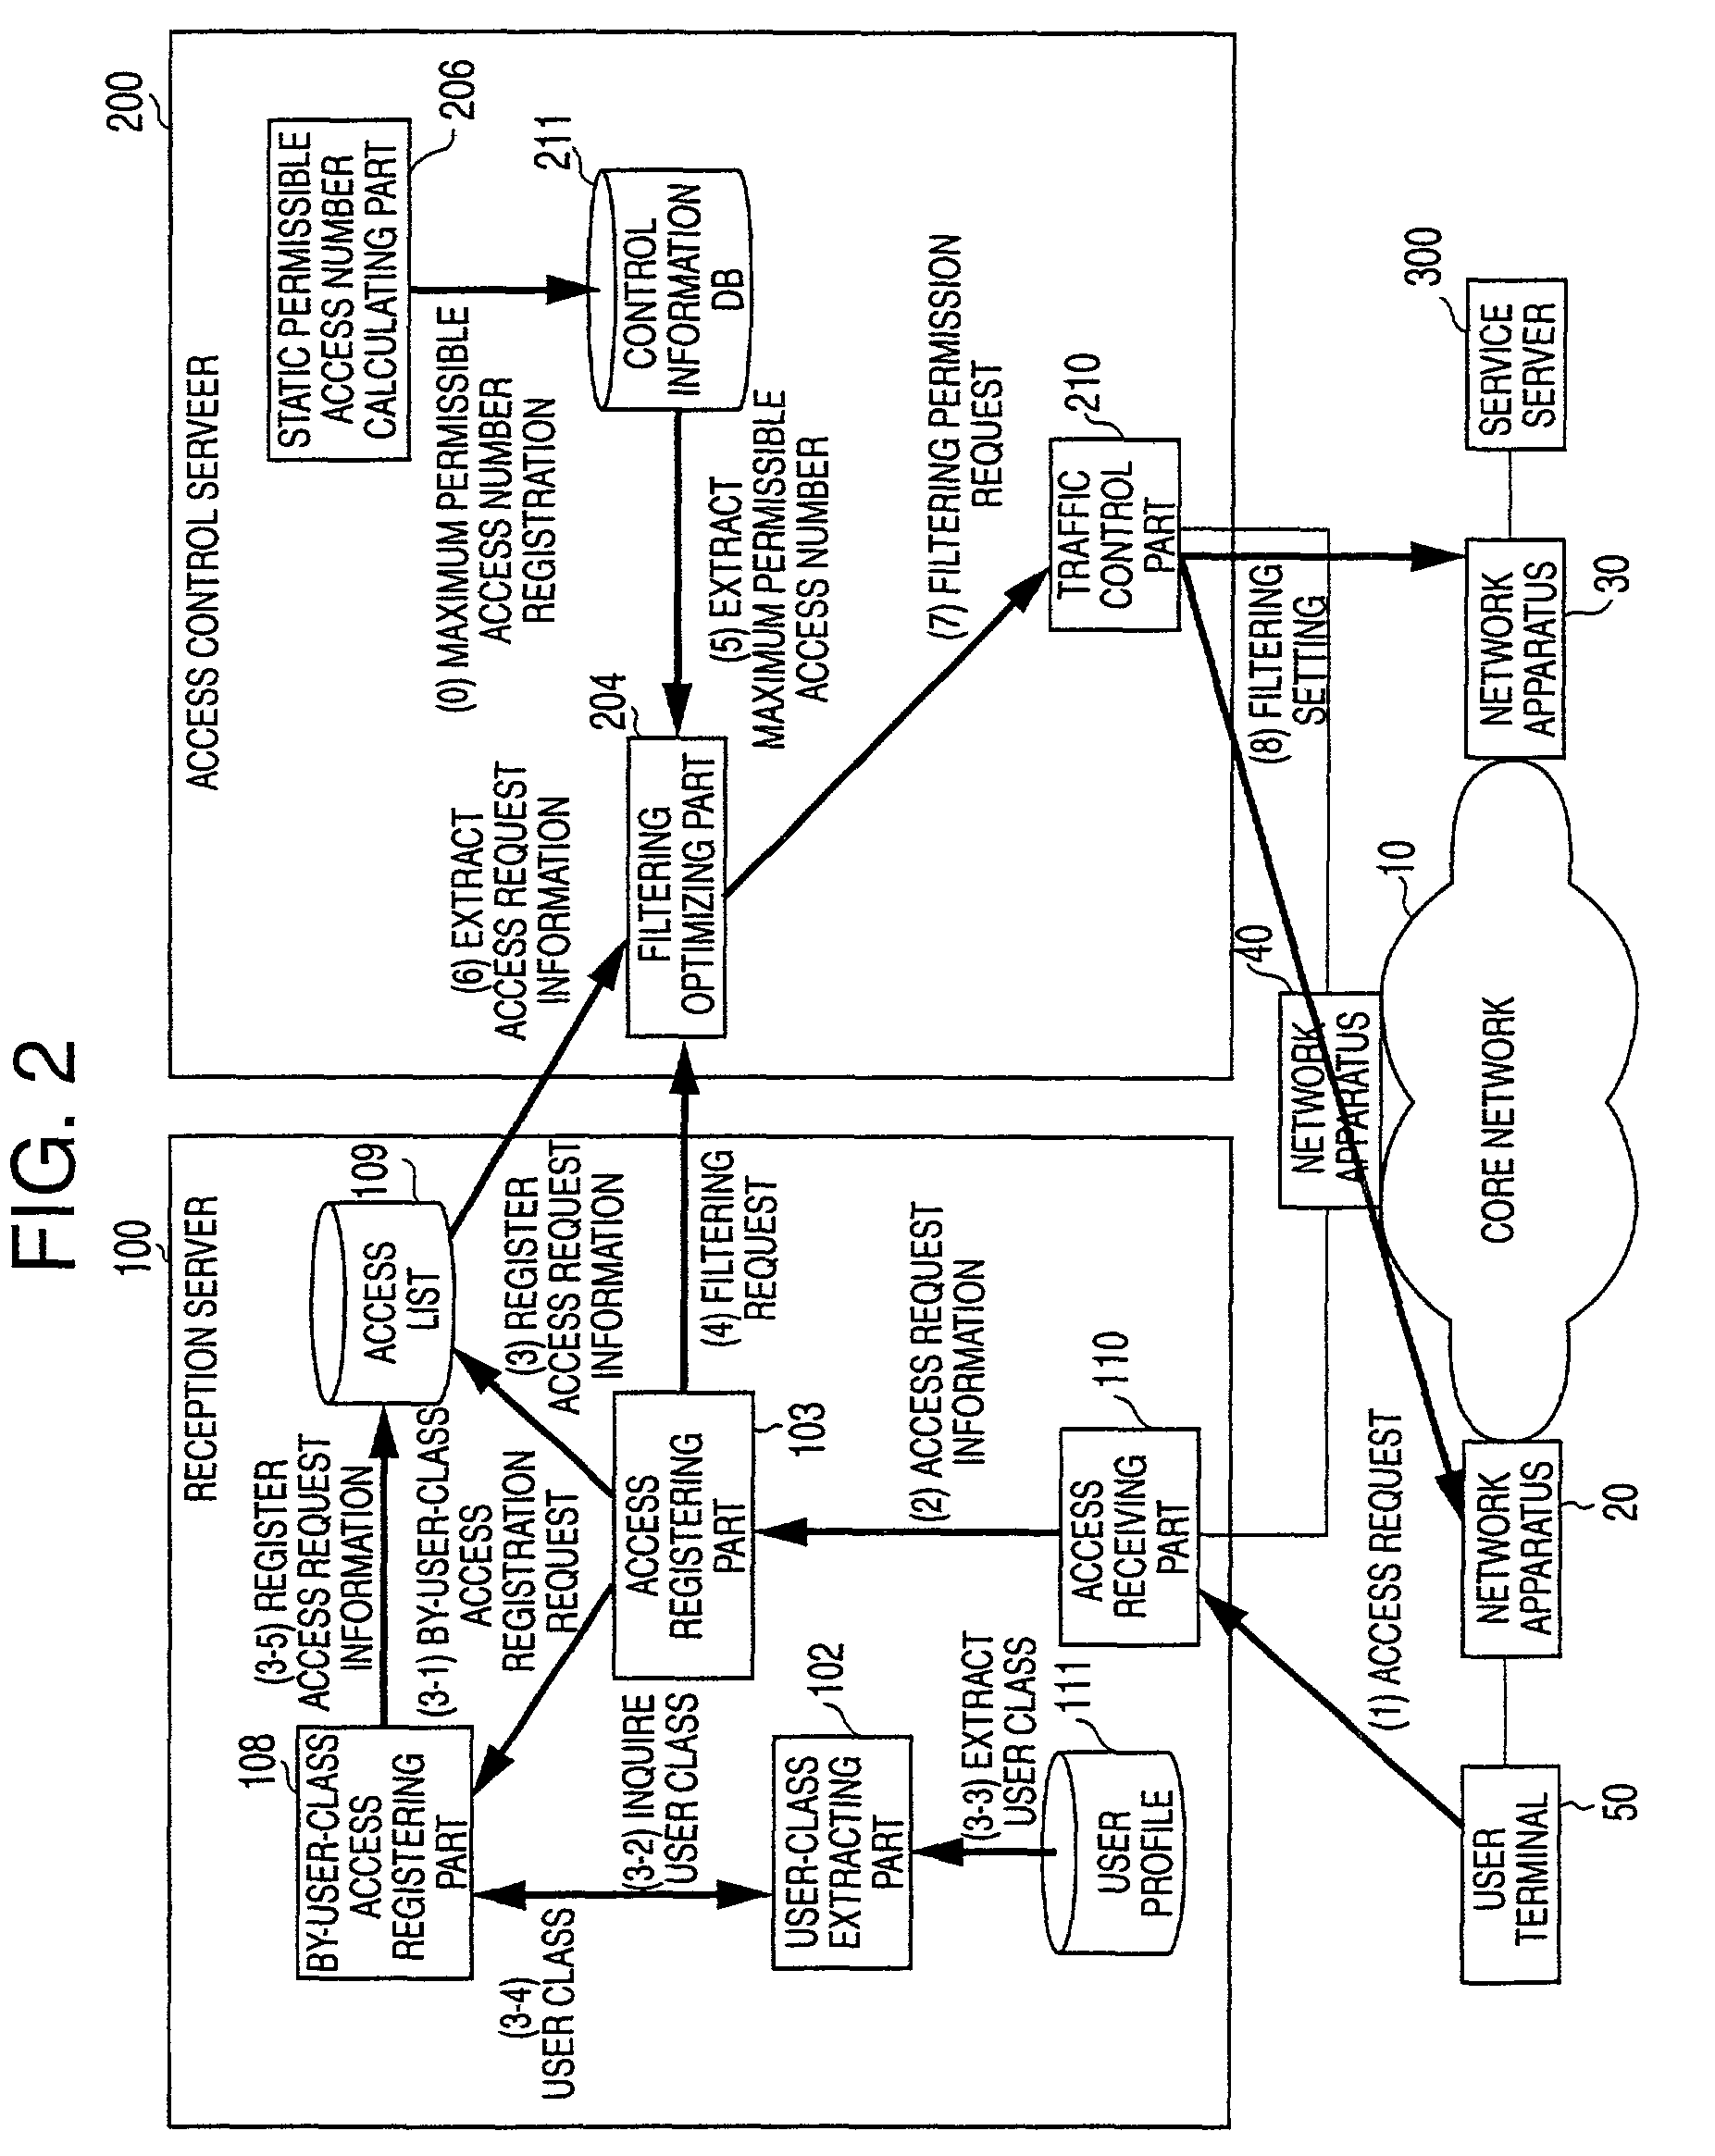 Network access control method, network system using the method and apparatuses configuring the system